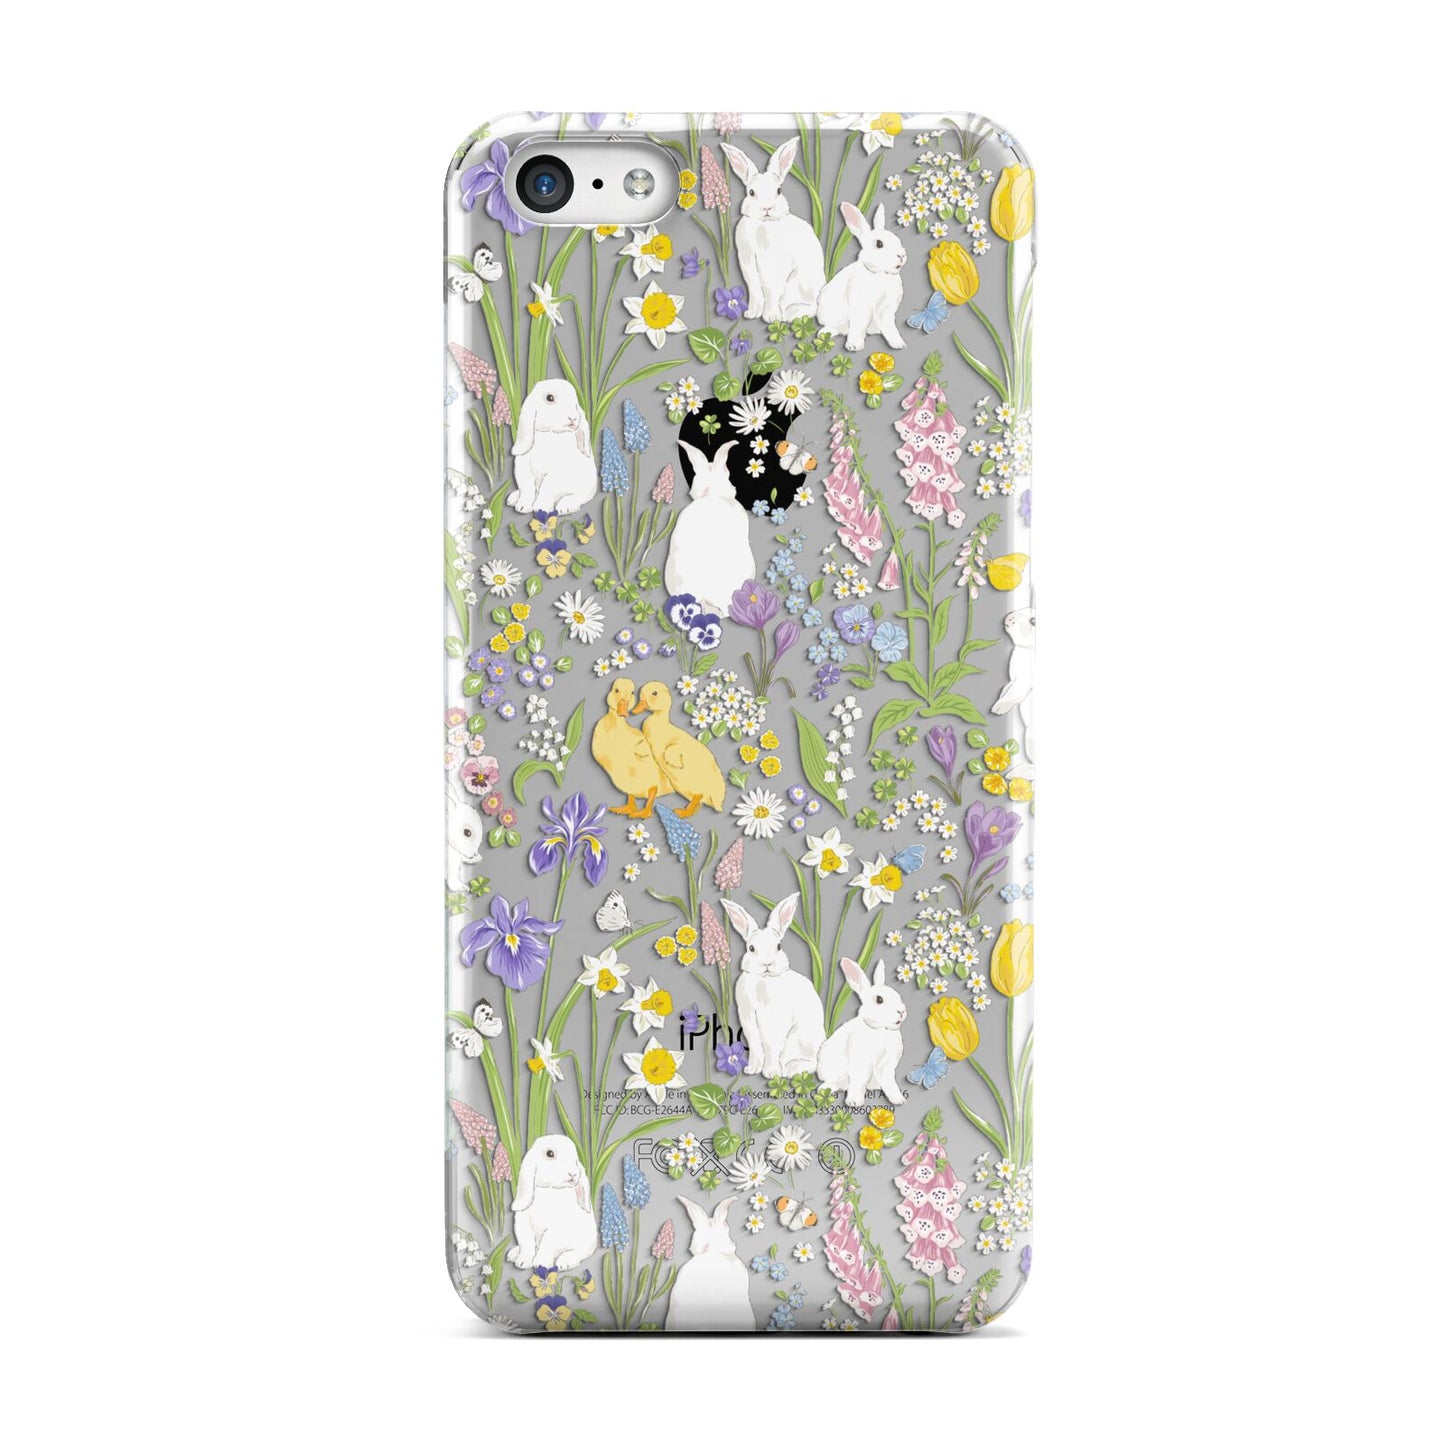 Easter Apple iPhone 5c Case